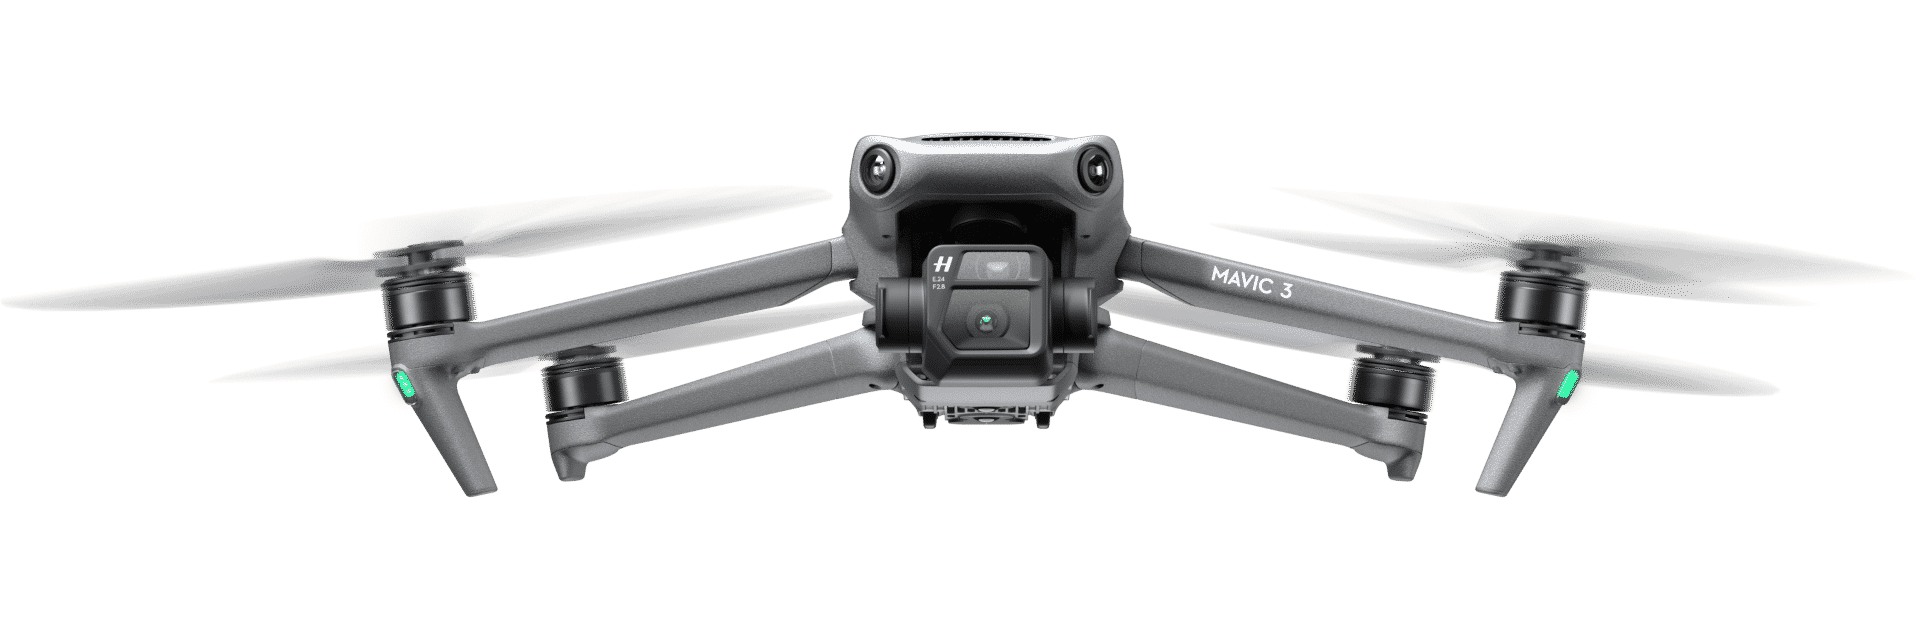 Drone Experts Perth